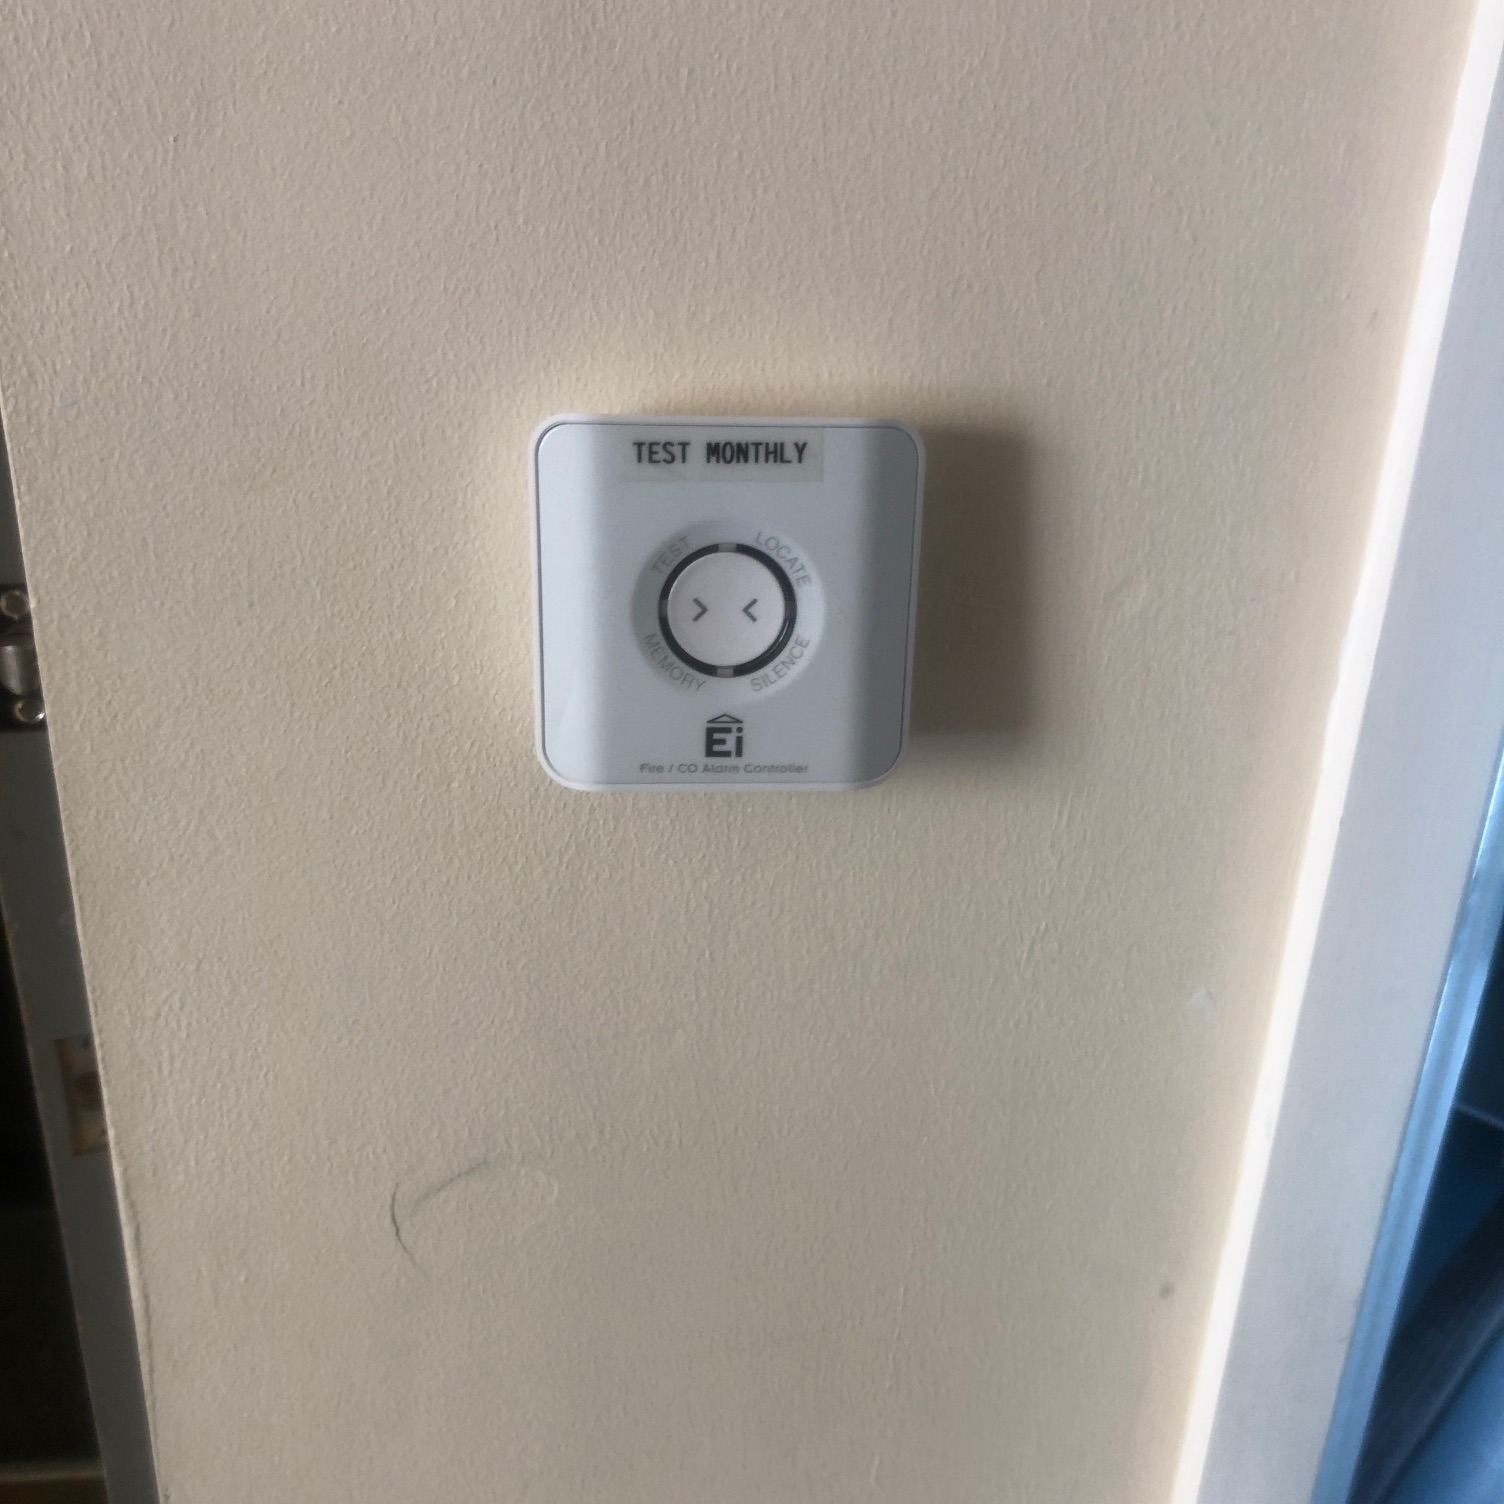 fire alarm and carbon monoxide detector installation at a HMO in Coventry by Electrical Experts